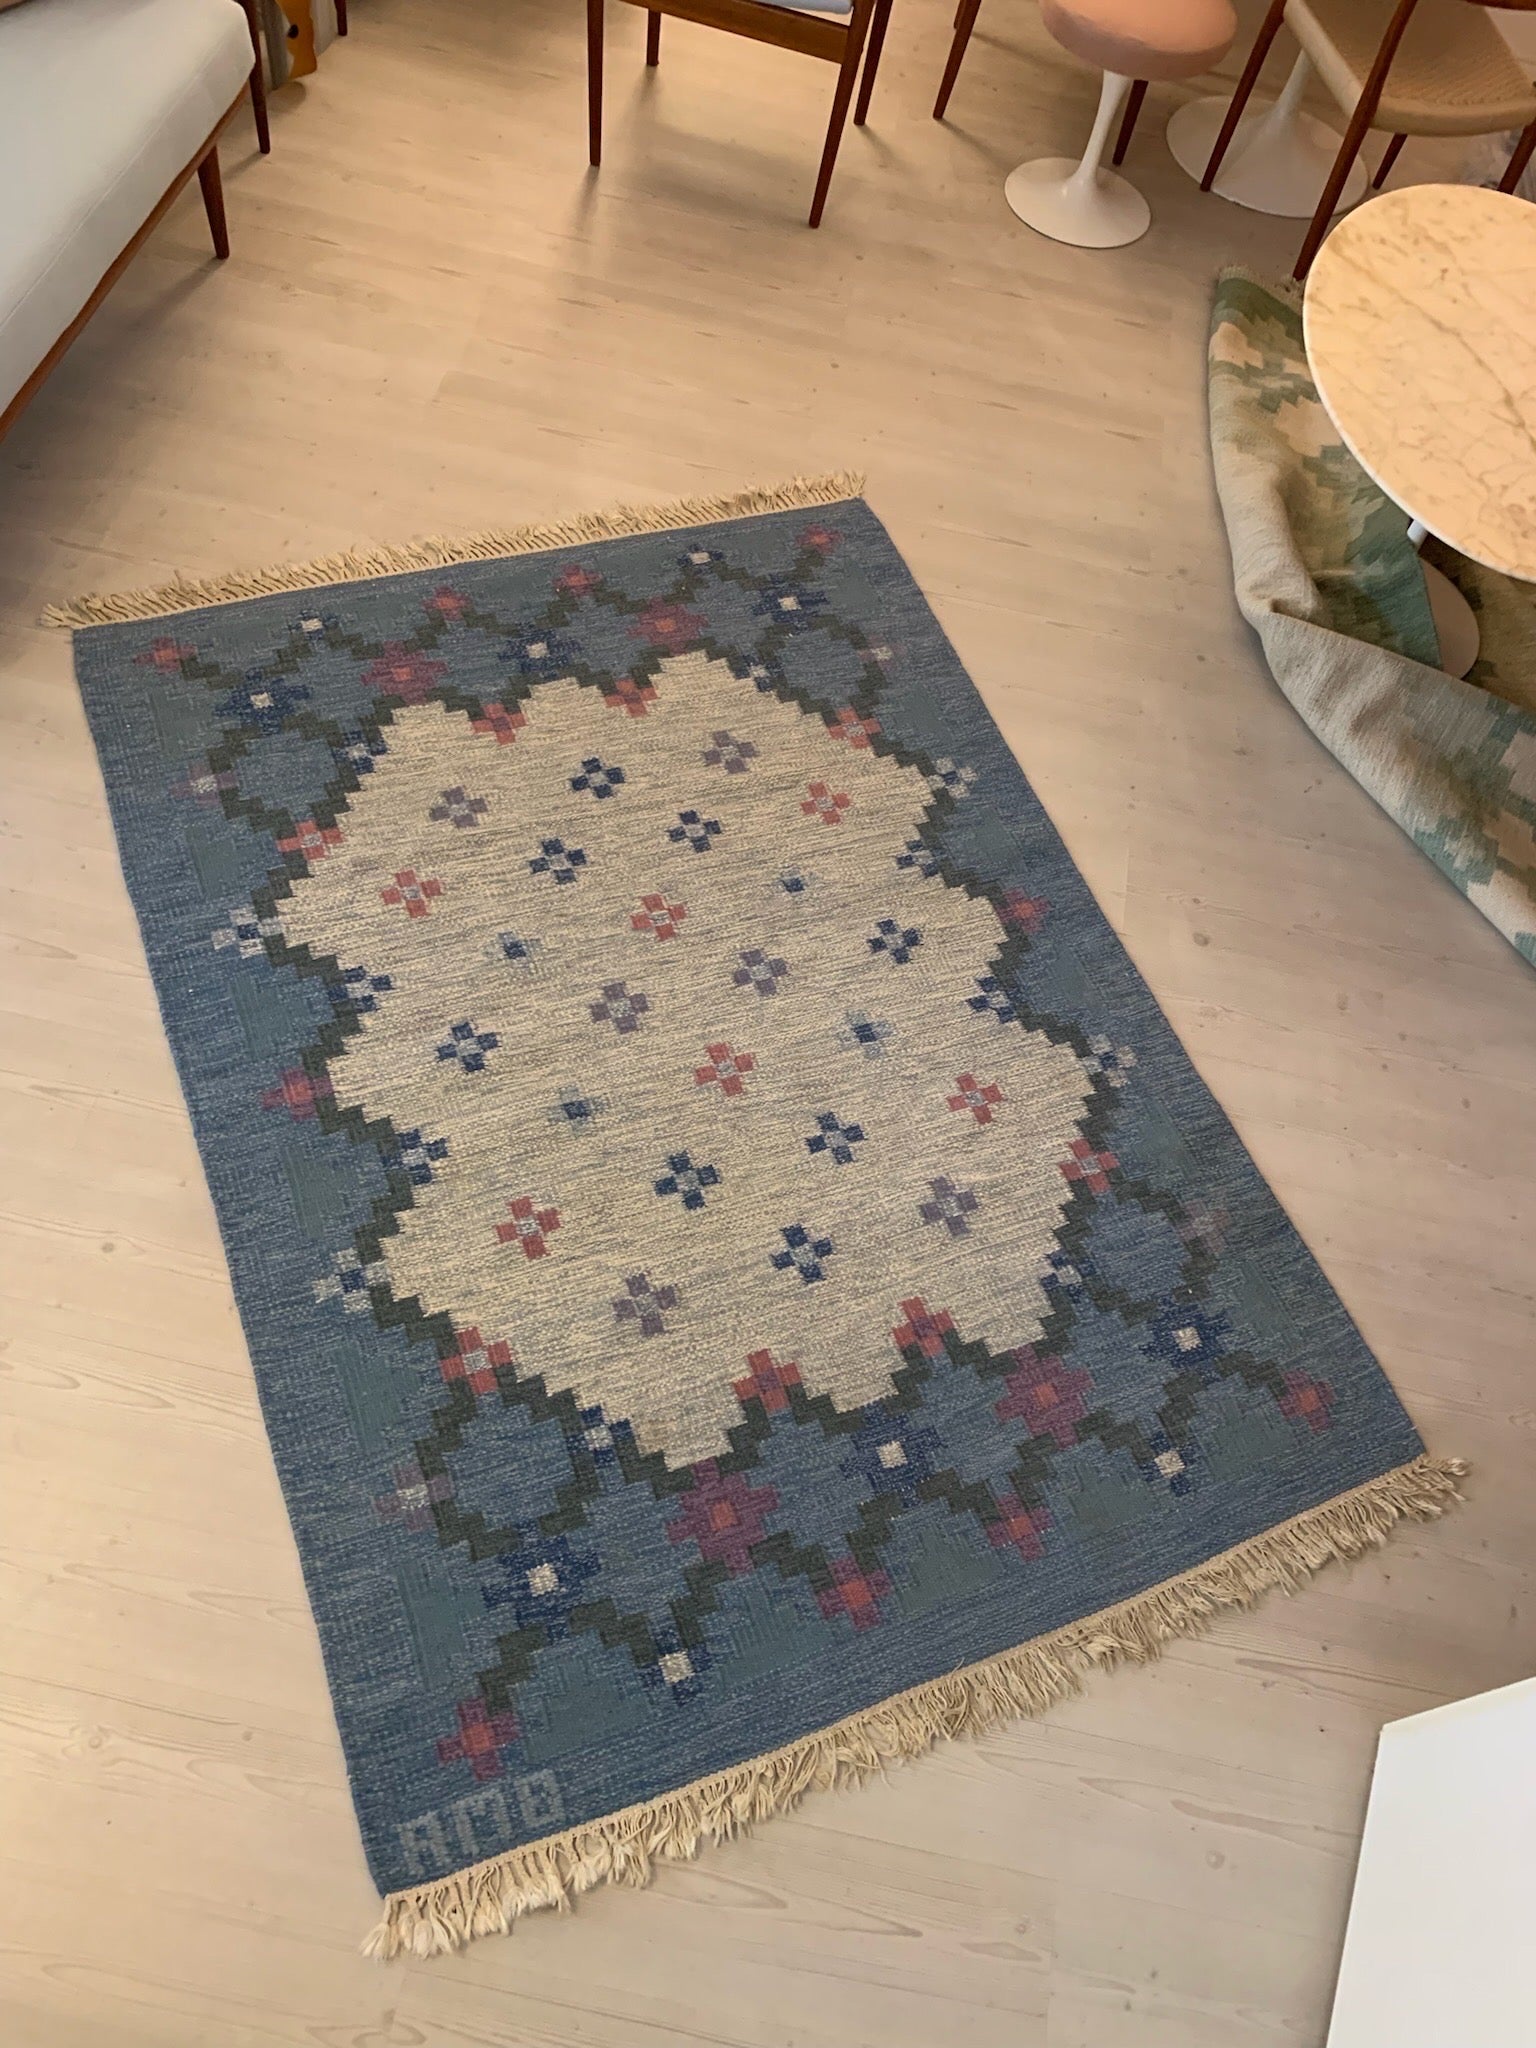 * Mid century carpet designed by Anne-Marie Boberg
* Signed with the initials AMB
* Produced in Sweden 1950's
* Hand woven in wool 
* Mid century, Scandinavian 
* Good vintage condition, with minor signs of usage
* Dimensions (W x D): 200 x